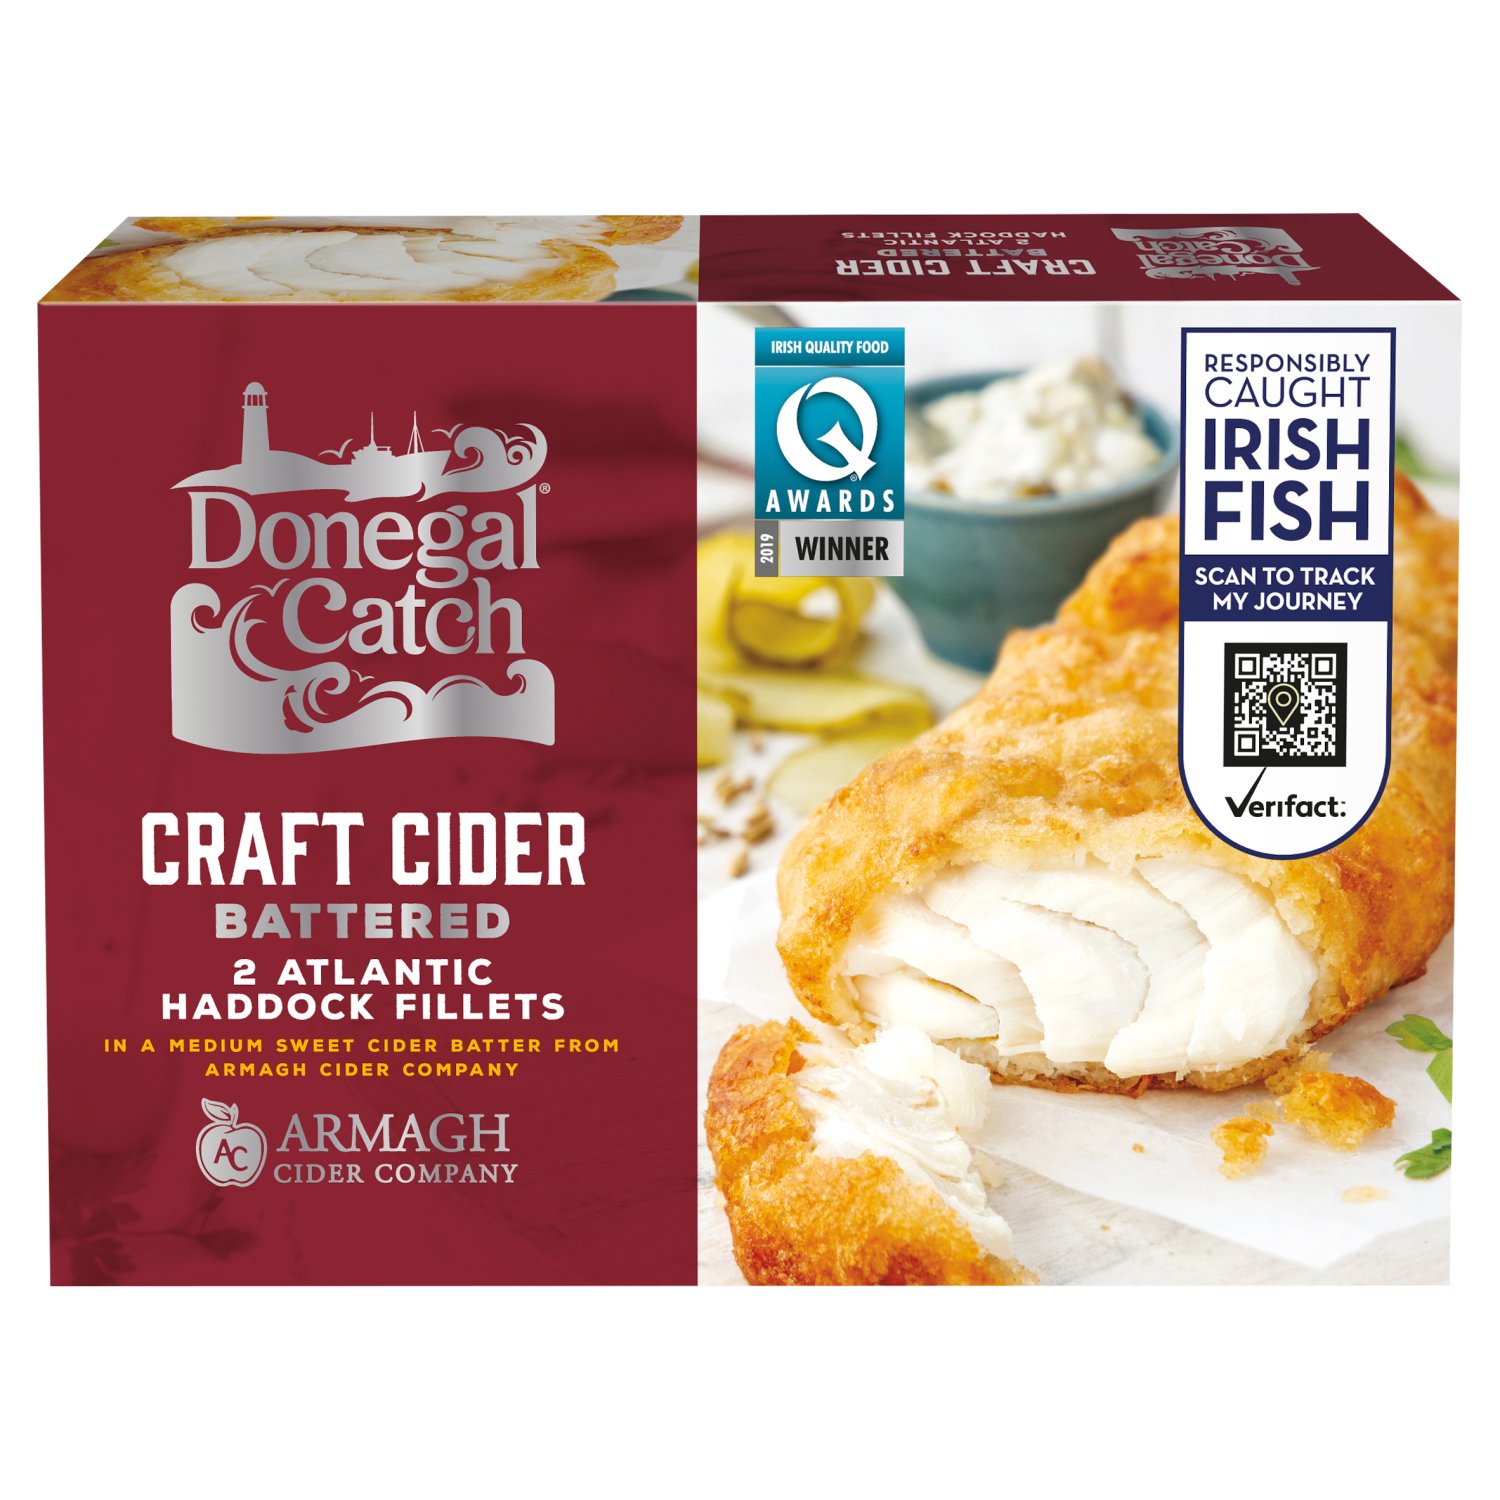 Delicious Atlantic fillets in maddens mellow traditional Irish craft cider from Armagh Cider Company helps you bring gastro style dining home. Chunky white fish fillets, freshly frozen and hand filleted with a crispy batter made using maddens mellow cider giving the batter a light apple sweet flavour... The perfect Friday night treat!